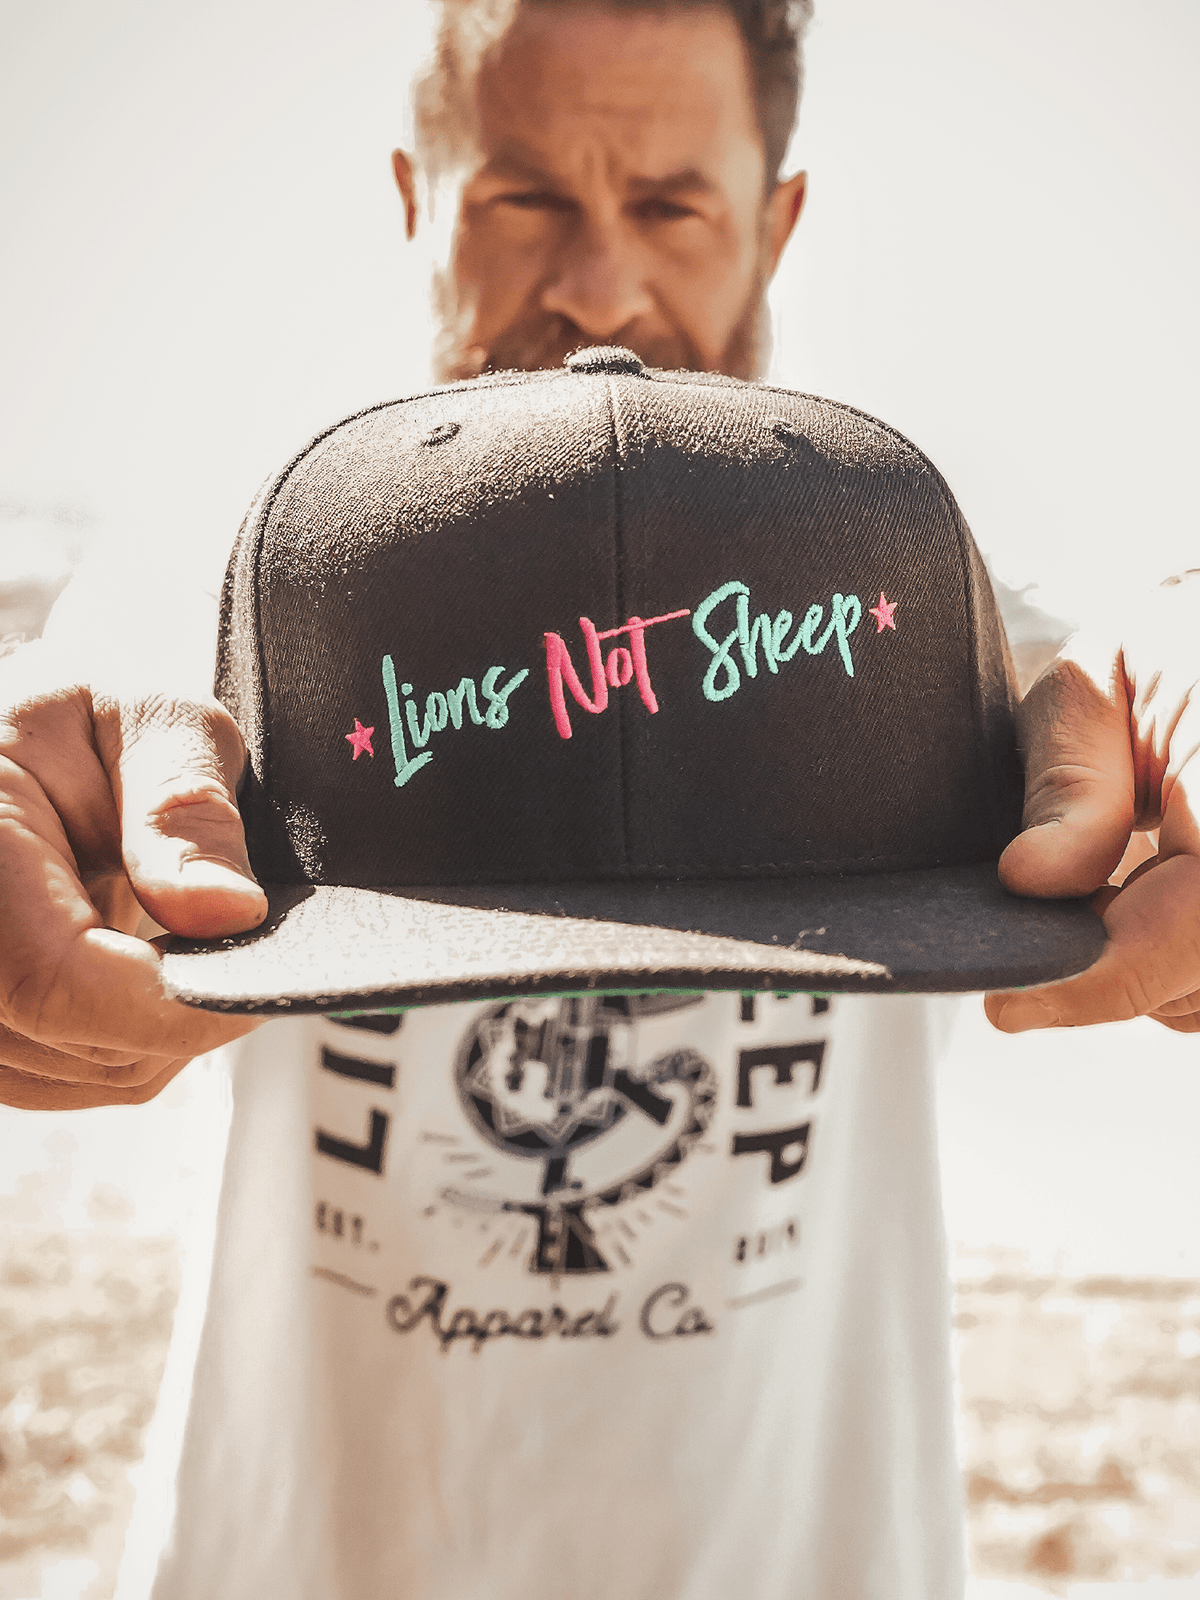 LIONS NOT SHEEP APPAREL CO. Hat - Lions Not Sheep ®